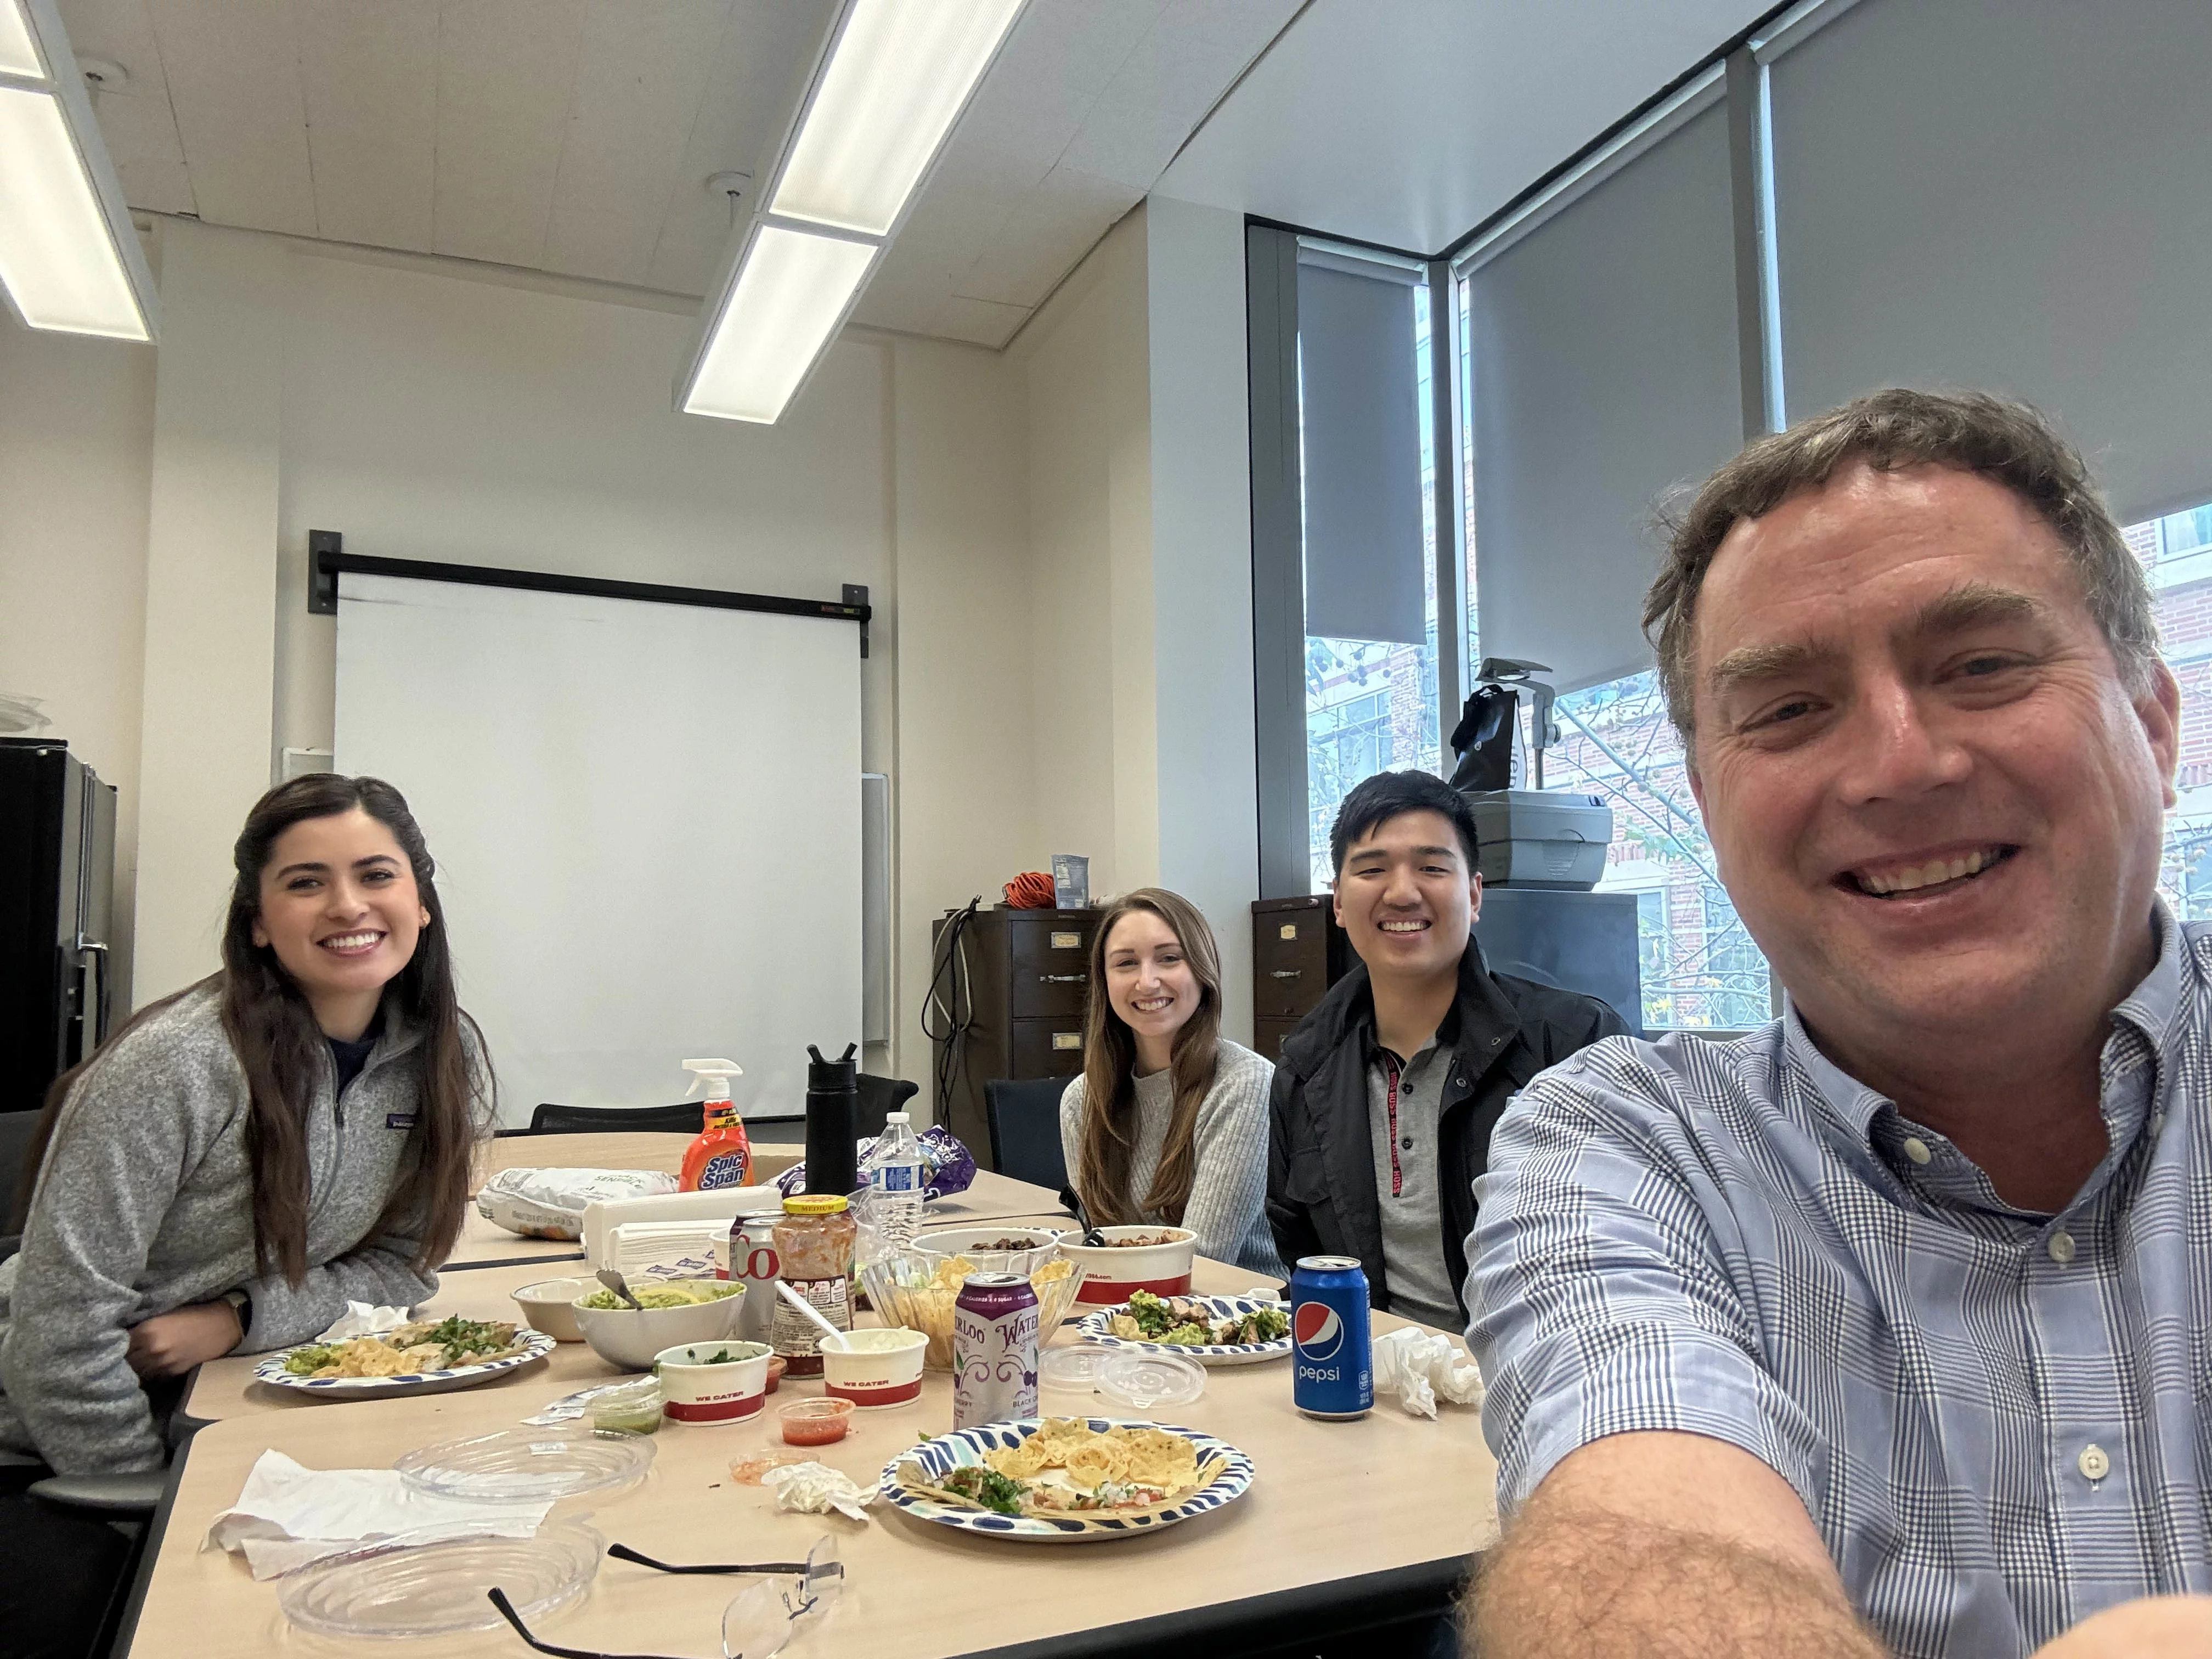 the professor and 3 students taking a selfie in the lab conference room while eating tacos